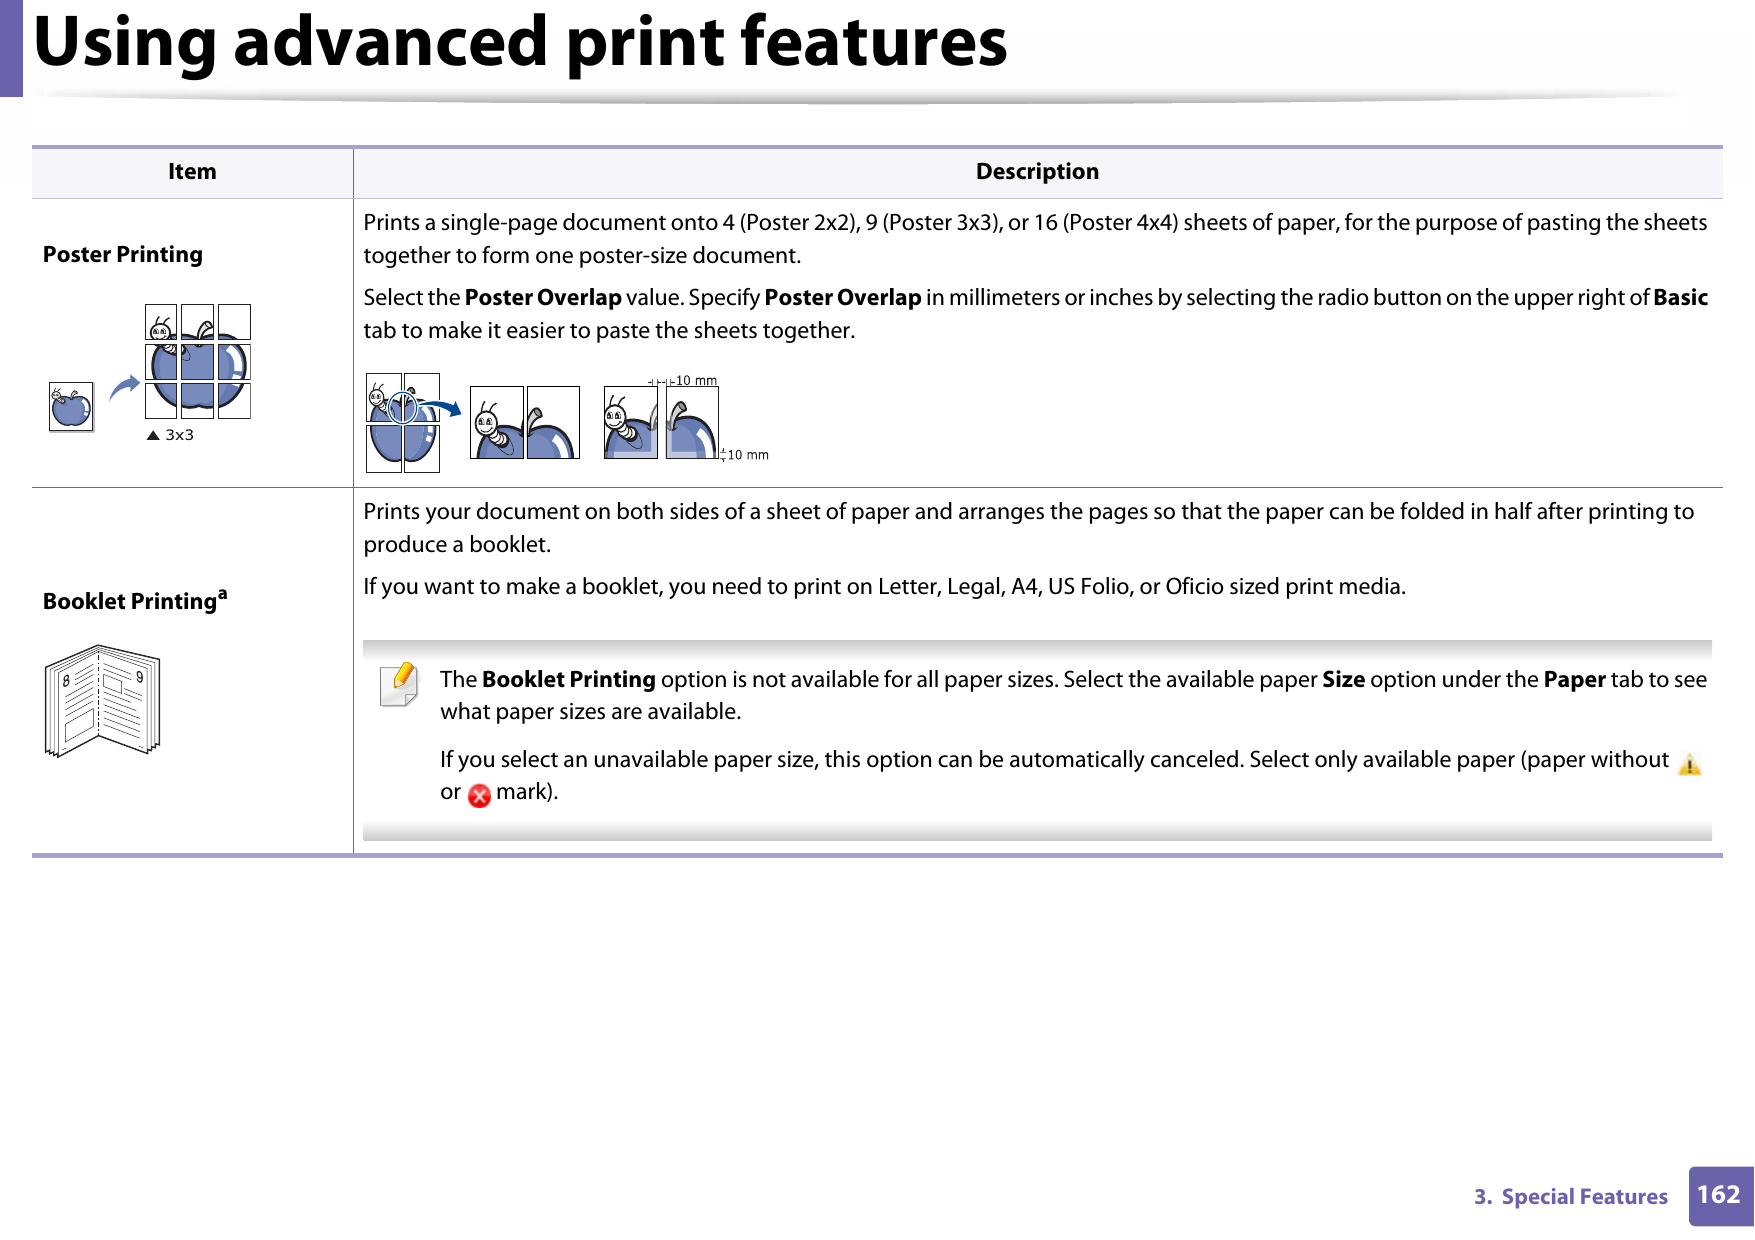 Using advanced print features1623.  Special FeaturesPoster PrintingPrints a single-page document onto 4 (Poster 2x2), 9 (Poster 3x3), or 16 (Poster 4x4) sheets of paper, for the purpose of pasting the sheets together to form one poster-size document.Select the Poster Overlap value. Specify Poster Overlap in millimeters or inches by selecting the radio button on the upper right of Basic tab to make it easier to paste the sheets together.Booklet PrintingaPrints your document on both sides of a sheet of paper and arranges the pages so that the paper can be folded in half after printing to produce a booklet.If you want to make a booklet, you need to print on Letter, Legal, A4, US Folio, or Oficio sized print media.  The Booklet Printing option is not available for all paper sizes. Select the available paper Size option under the Paper tab to see what paper sizes are available.If you select an unavailable paper size, this option can be automatically canceled. Select only available paper (paper without   or  mark). Item Description89